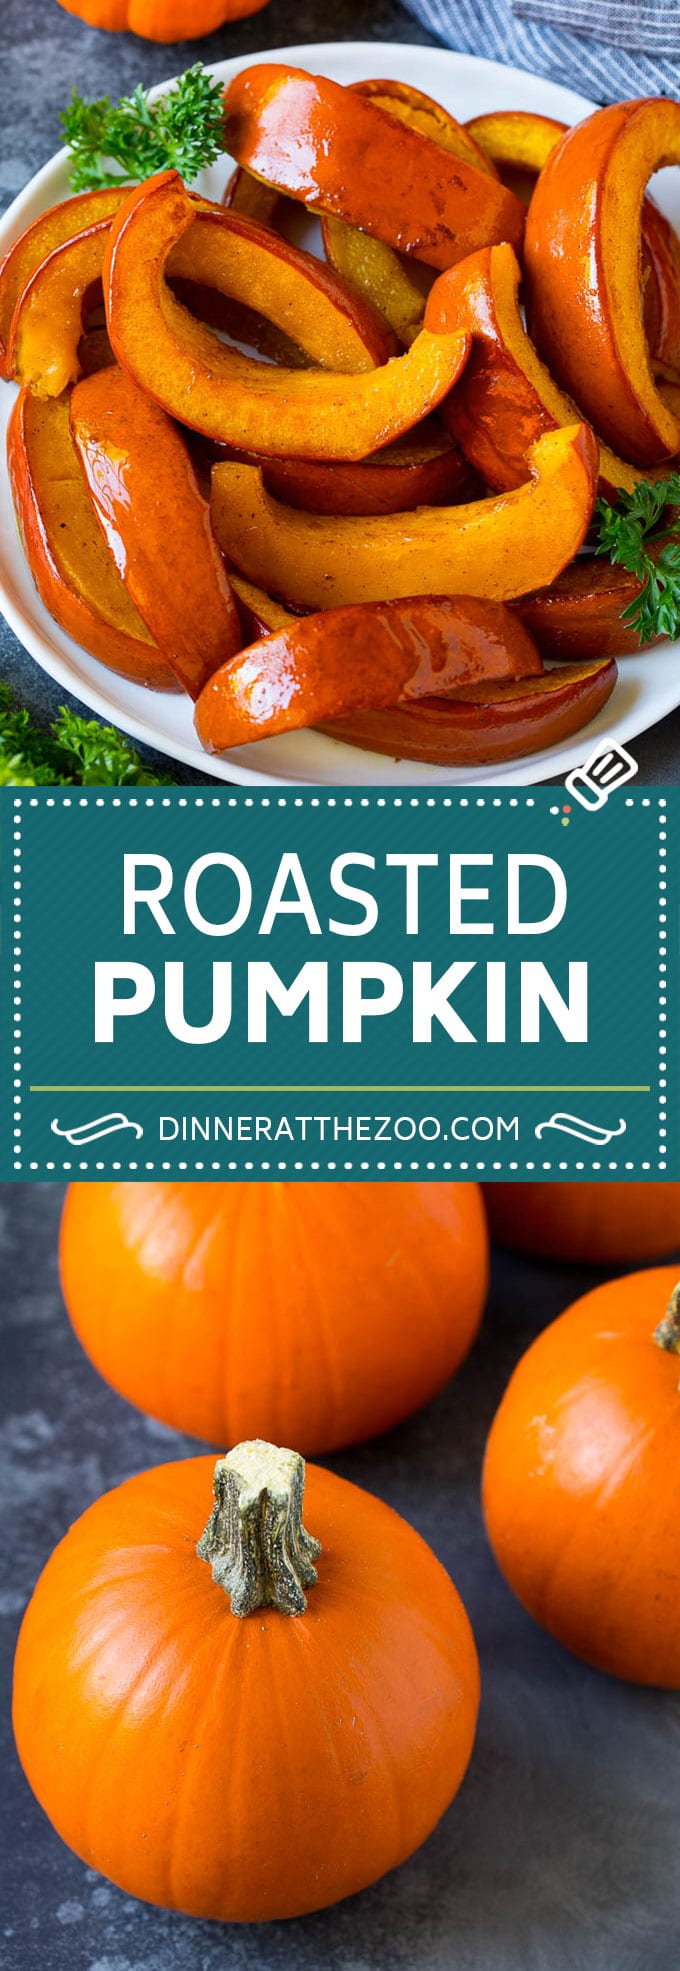 This roasted pumpkin recipe is sugar pie pumpkin wedges cooked with brown sugar, maple syrup and cinnamon.